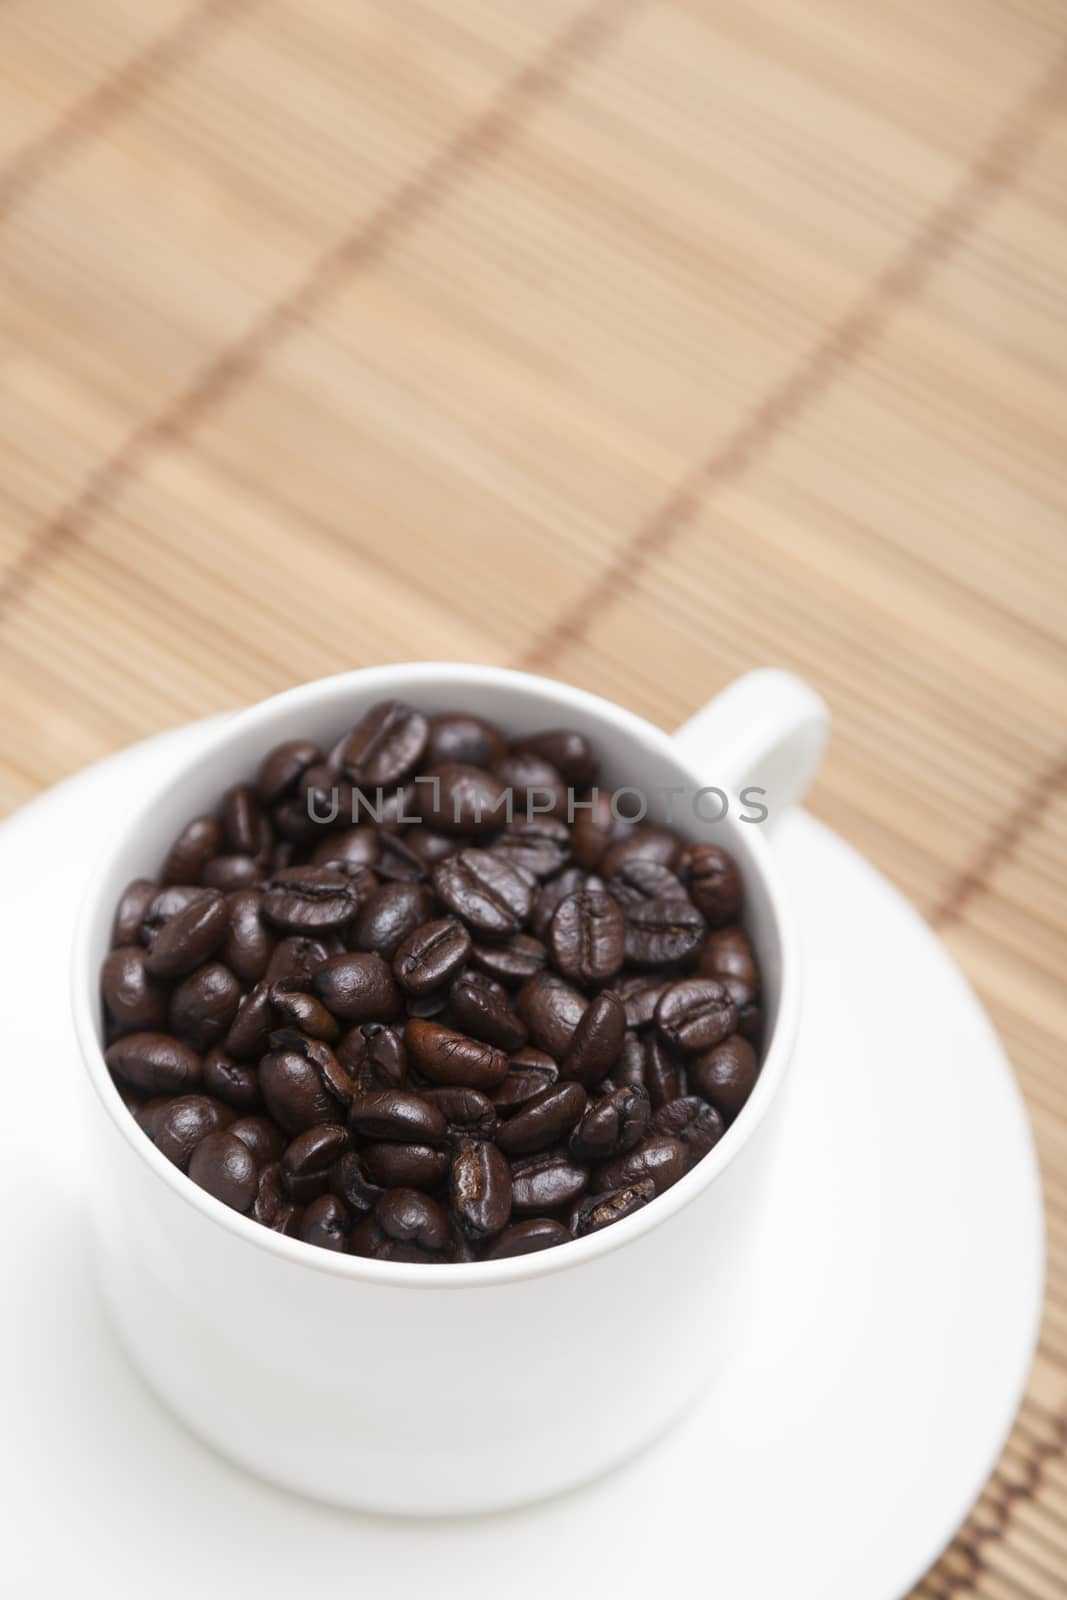 Roasted coffee beans In white coffee cup on wood.